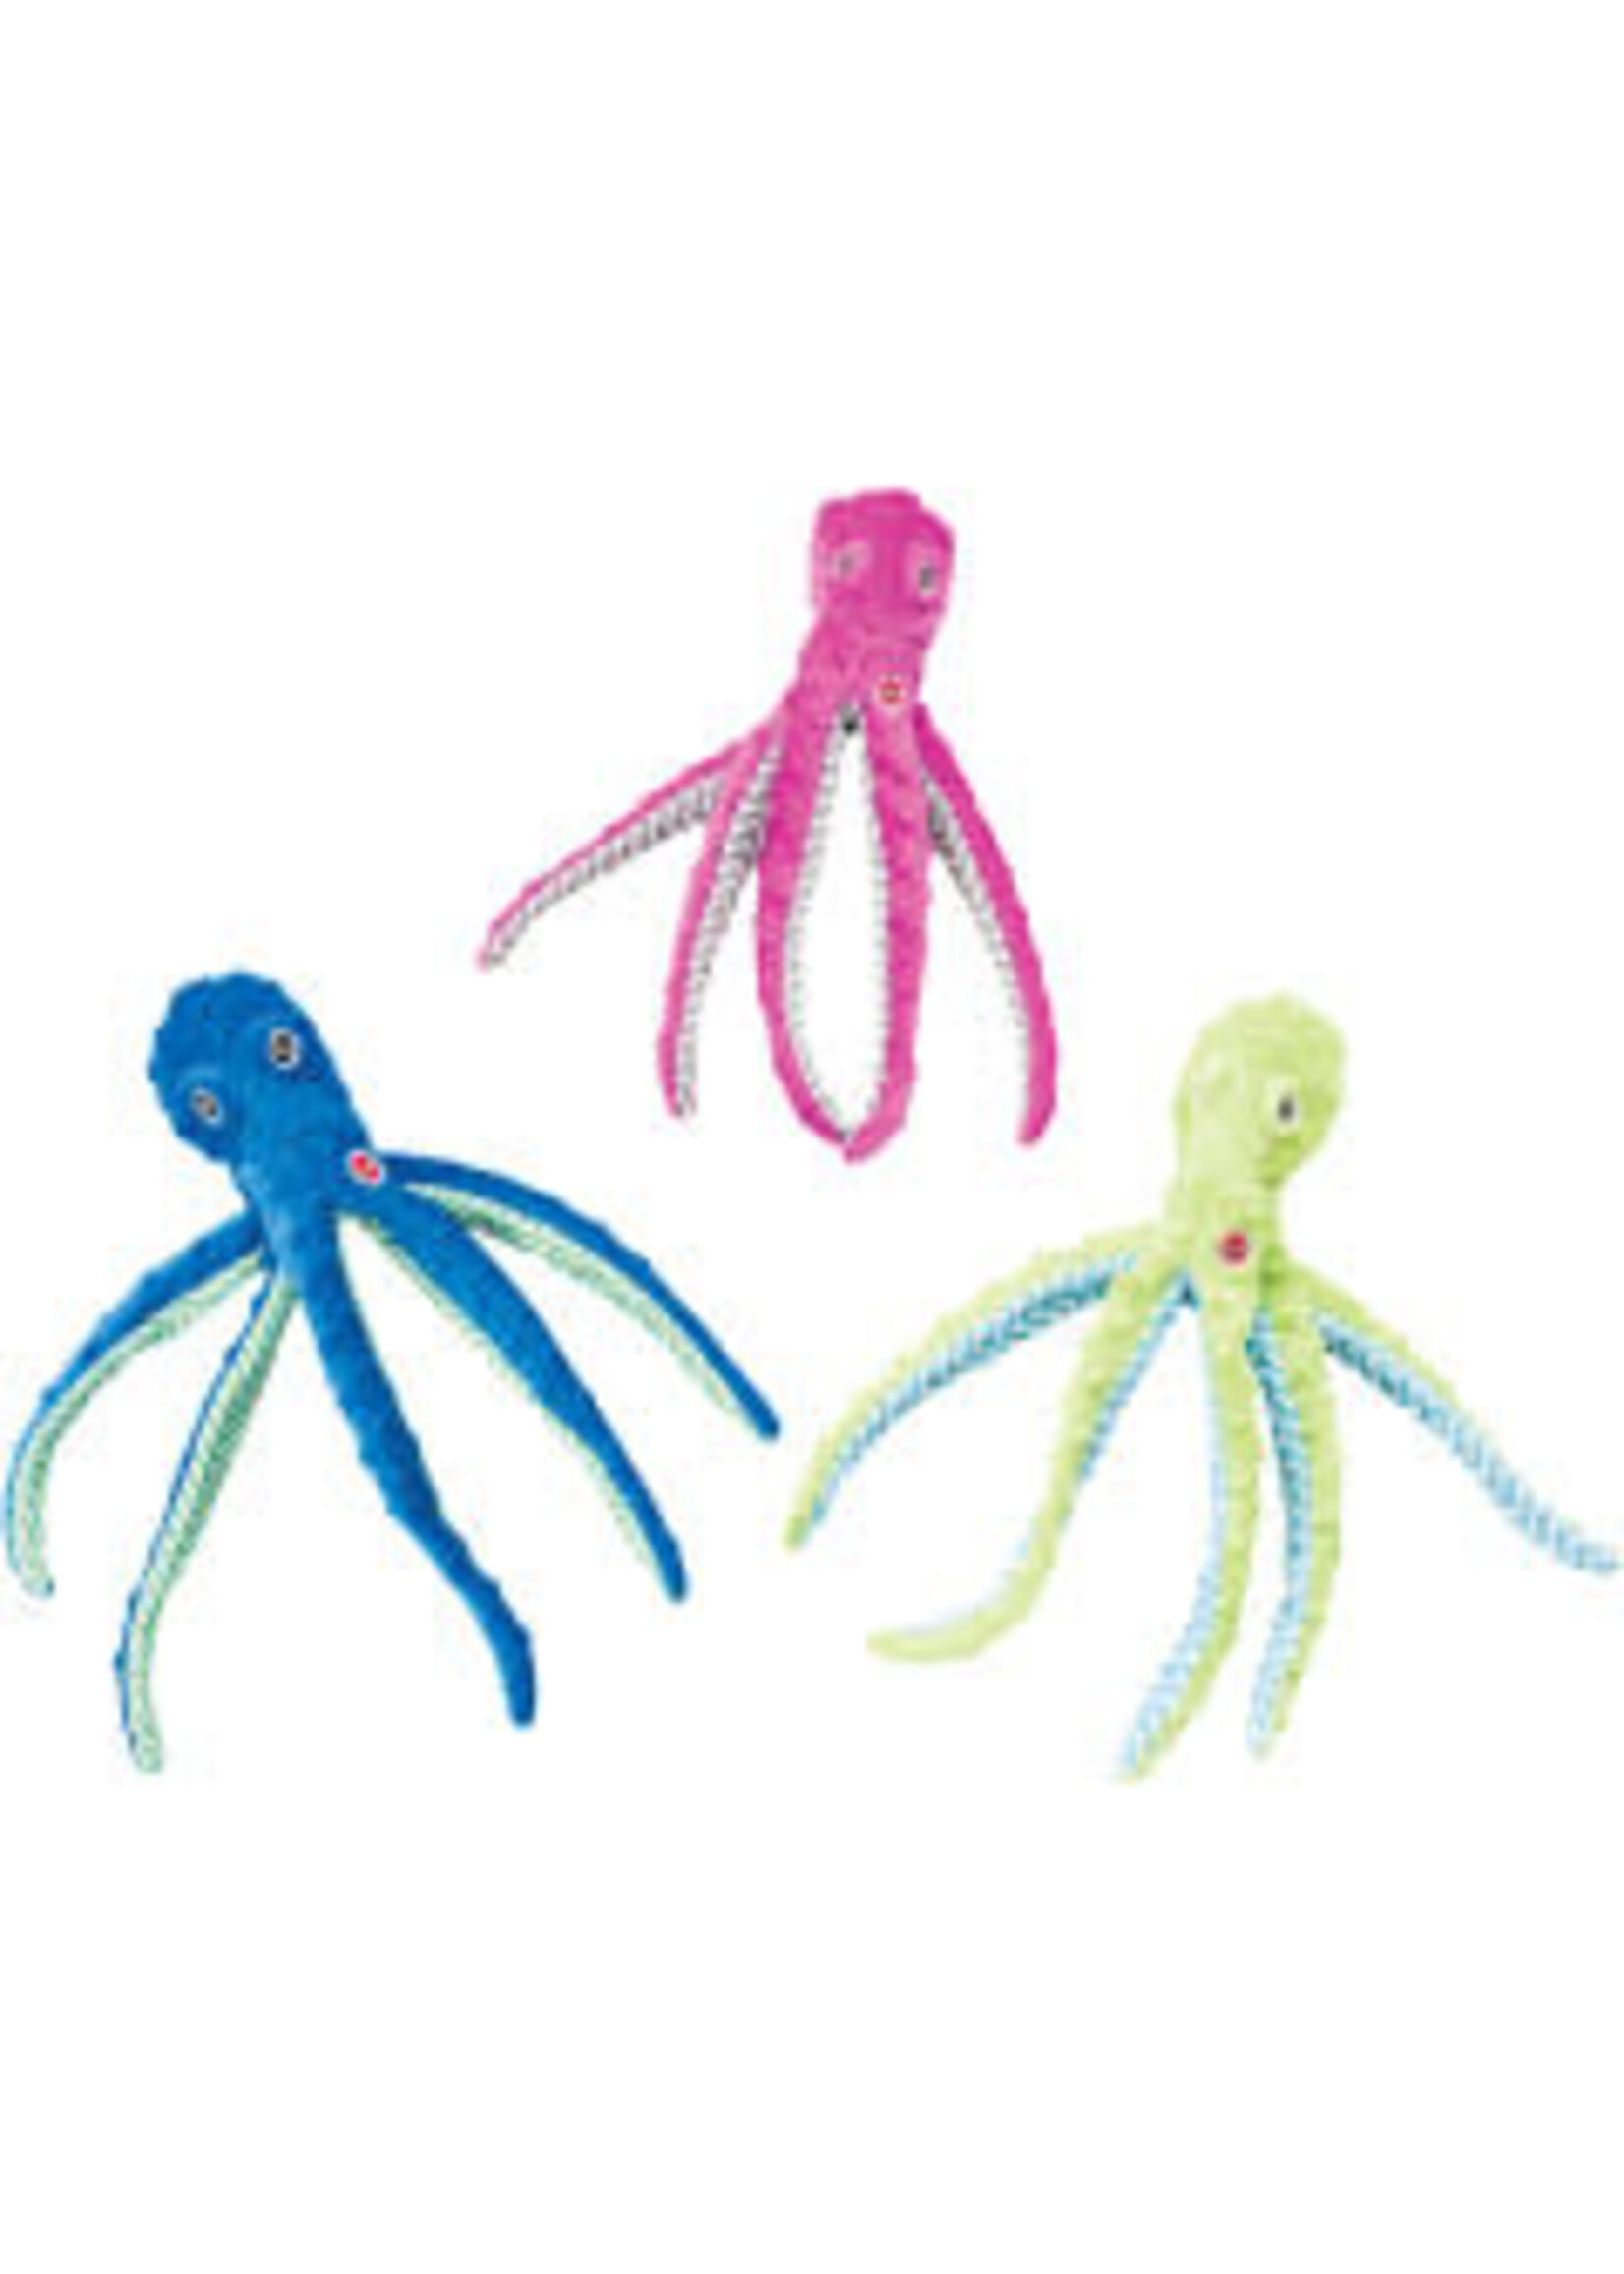 Ethical Ethical - Skinneeez Extreme Octopus 15" (Assorted)